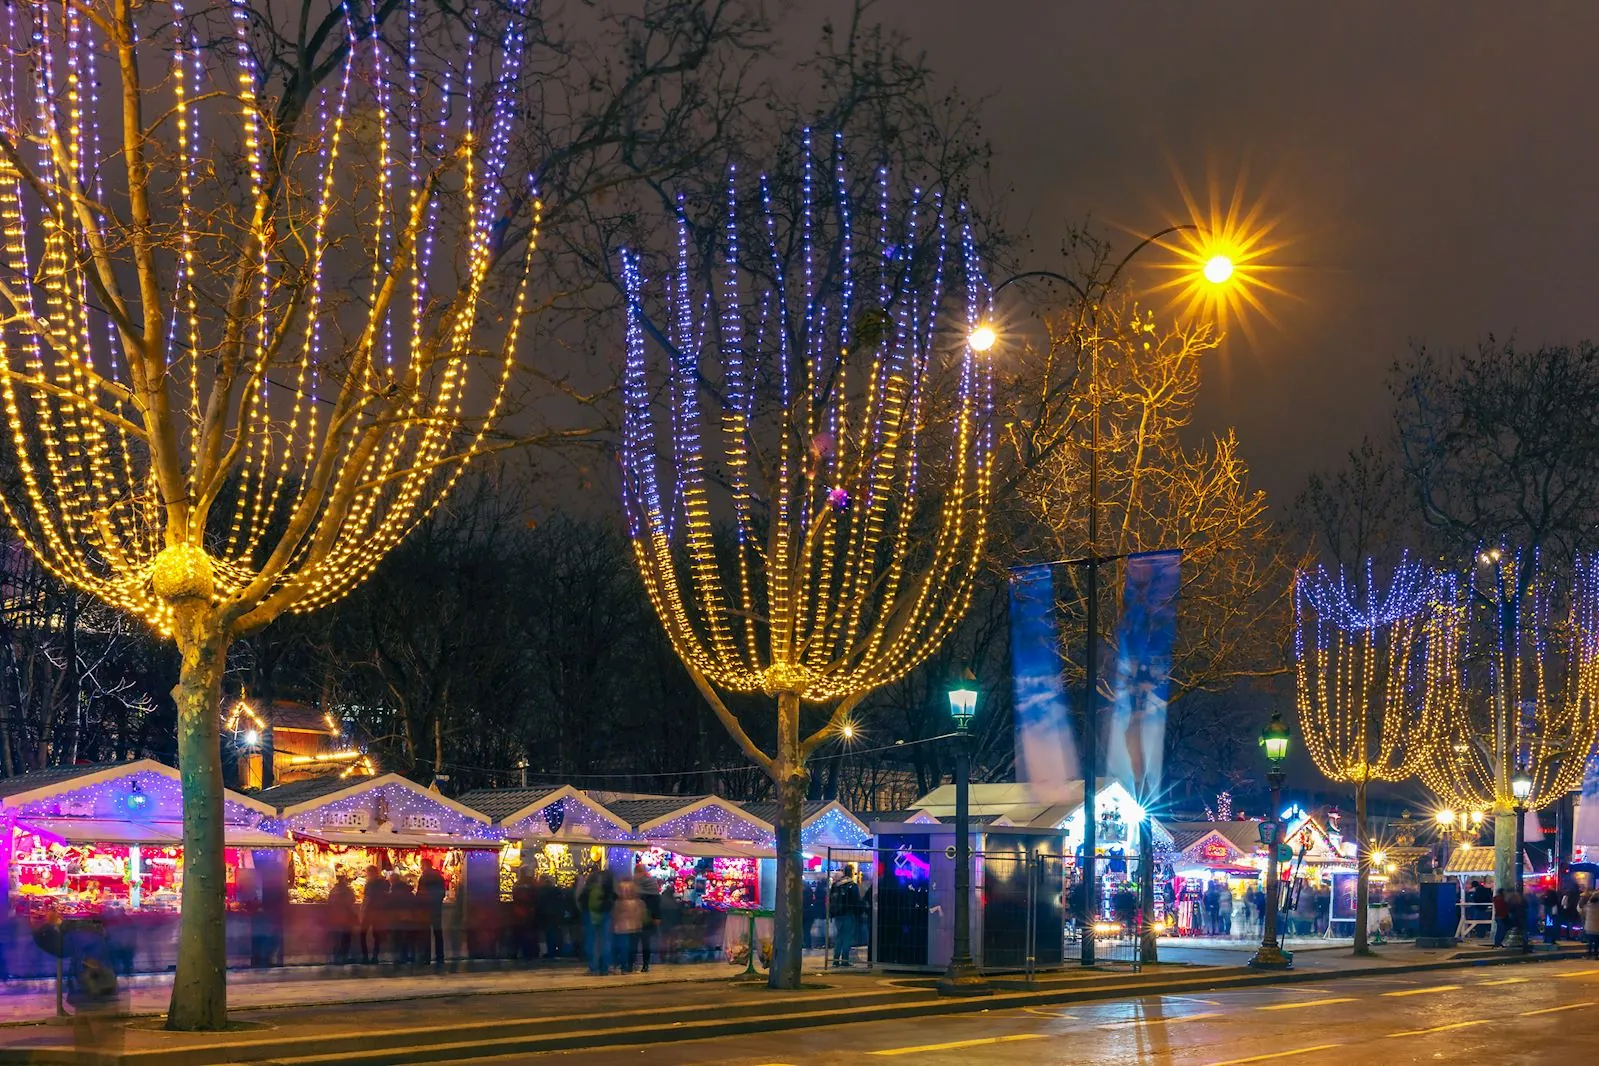 Christmas market on the Champs Elysees in Paris at night